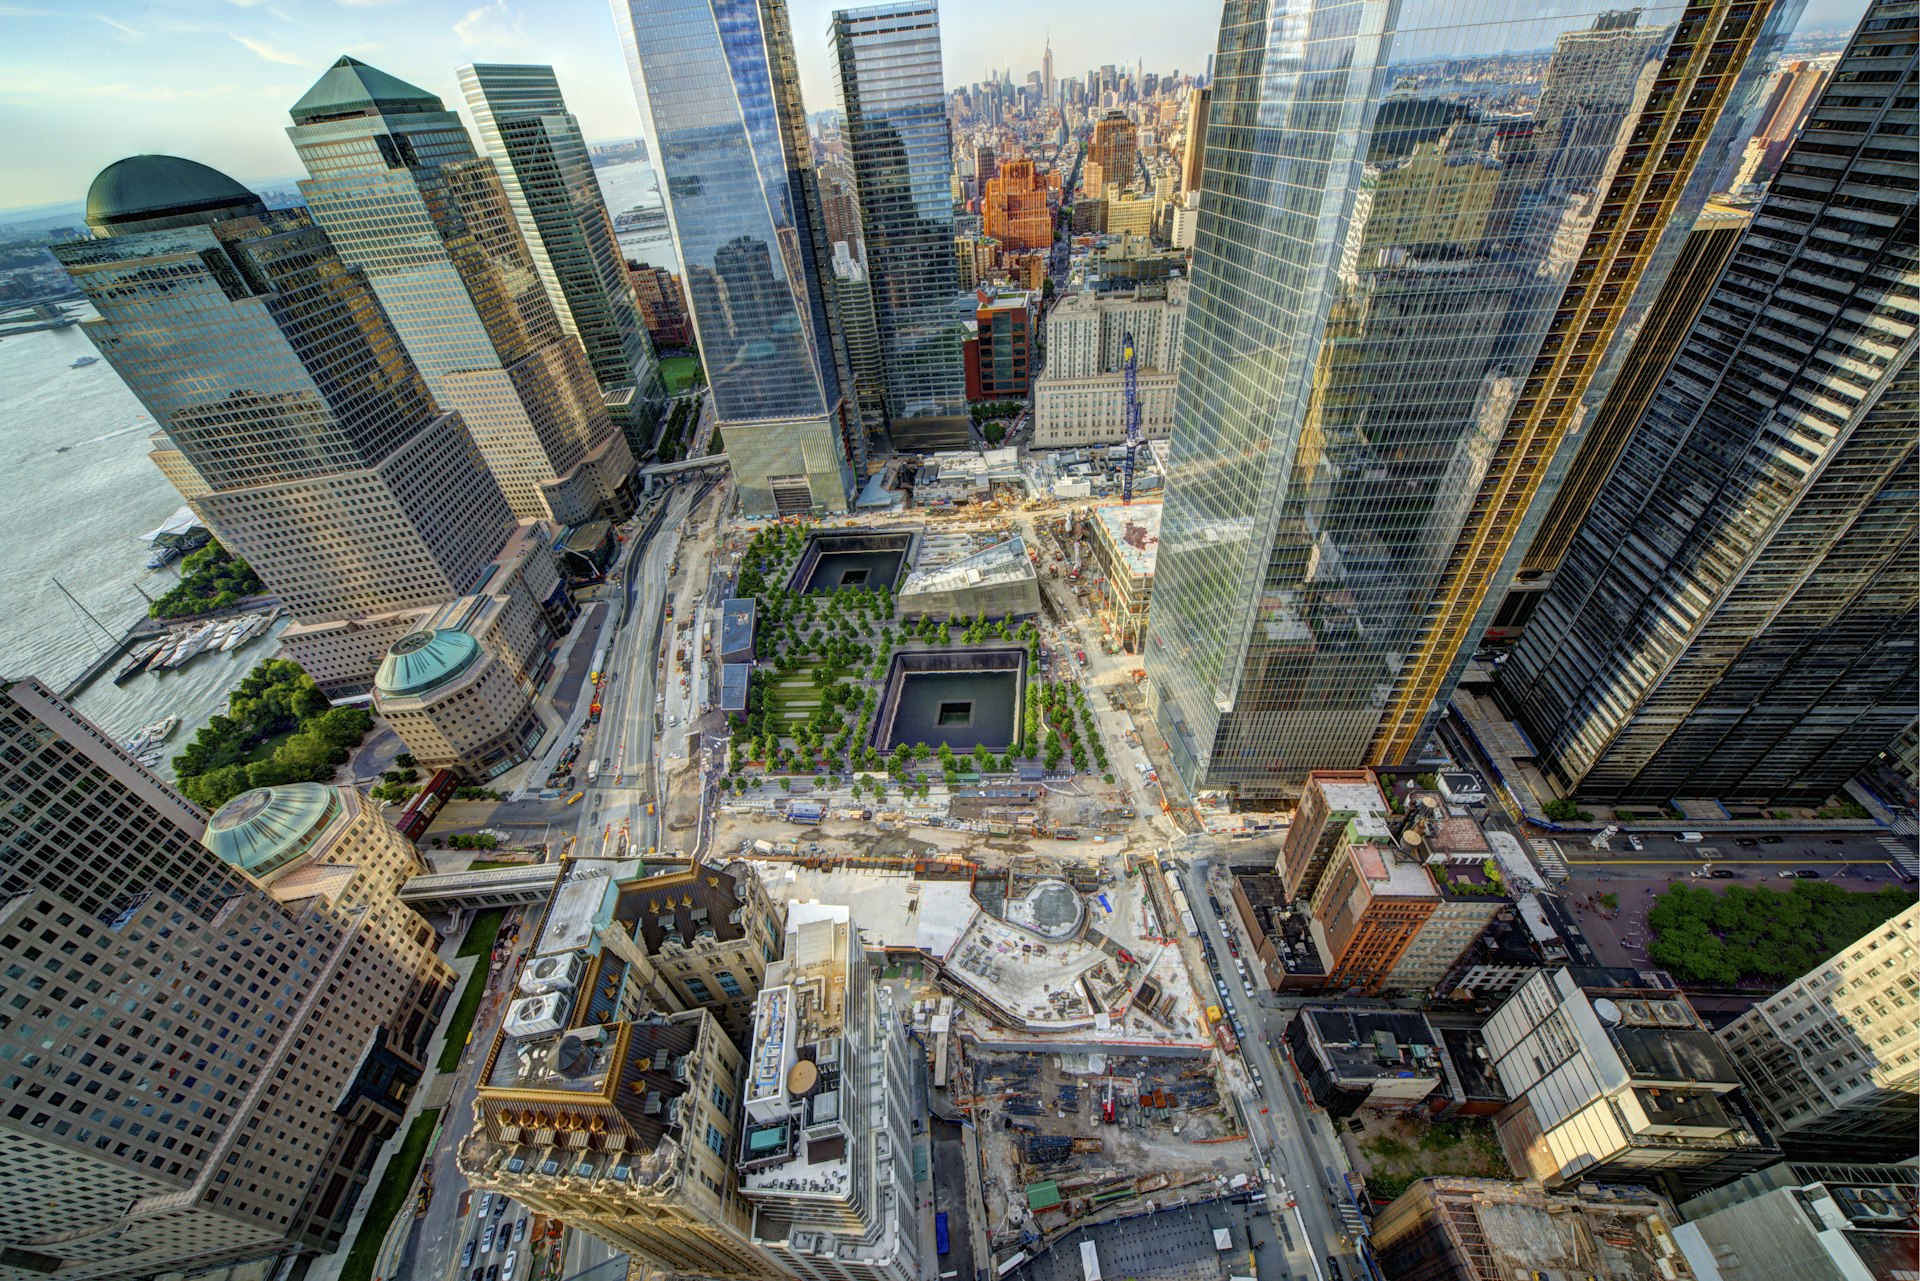 A photo from above of the glass buildings of the One World Trade Center